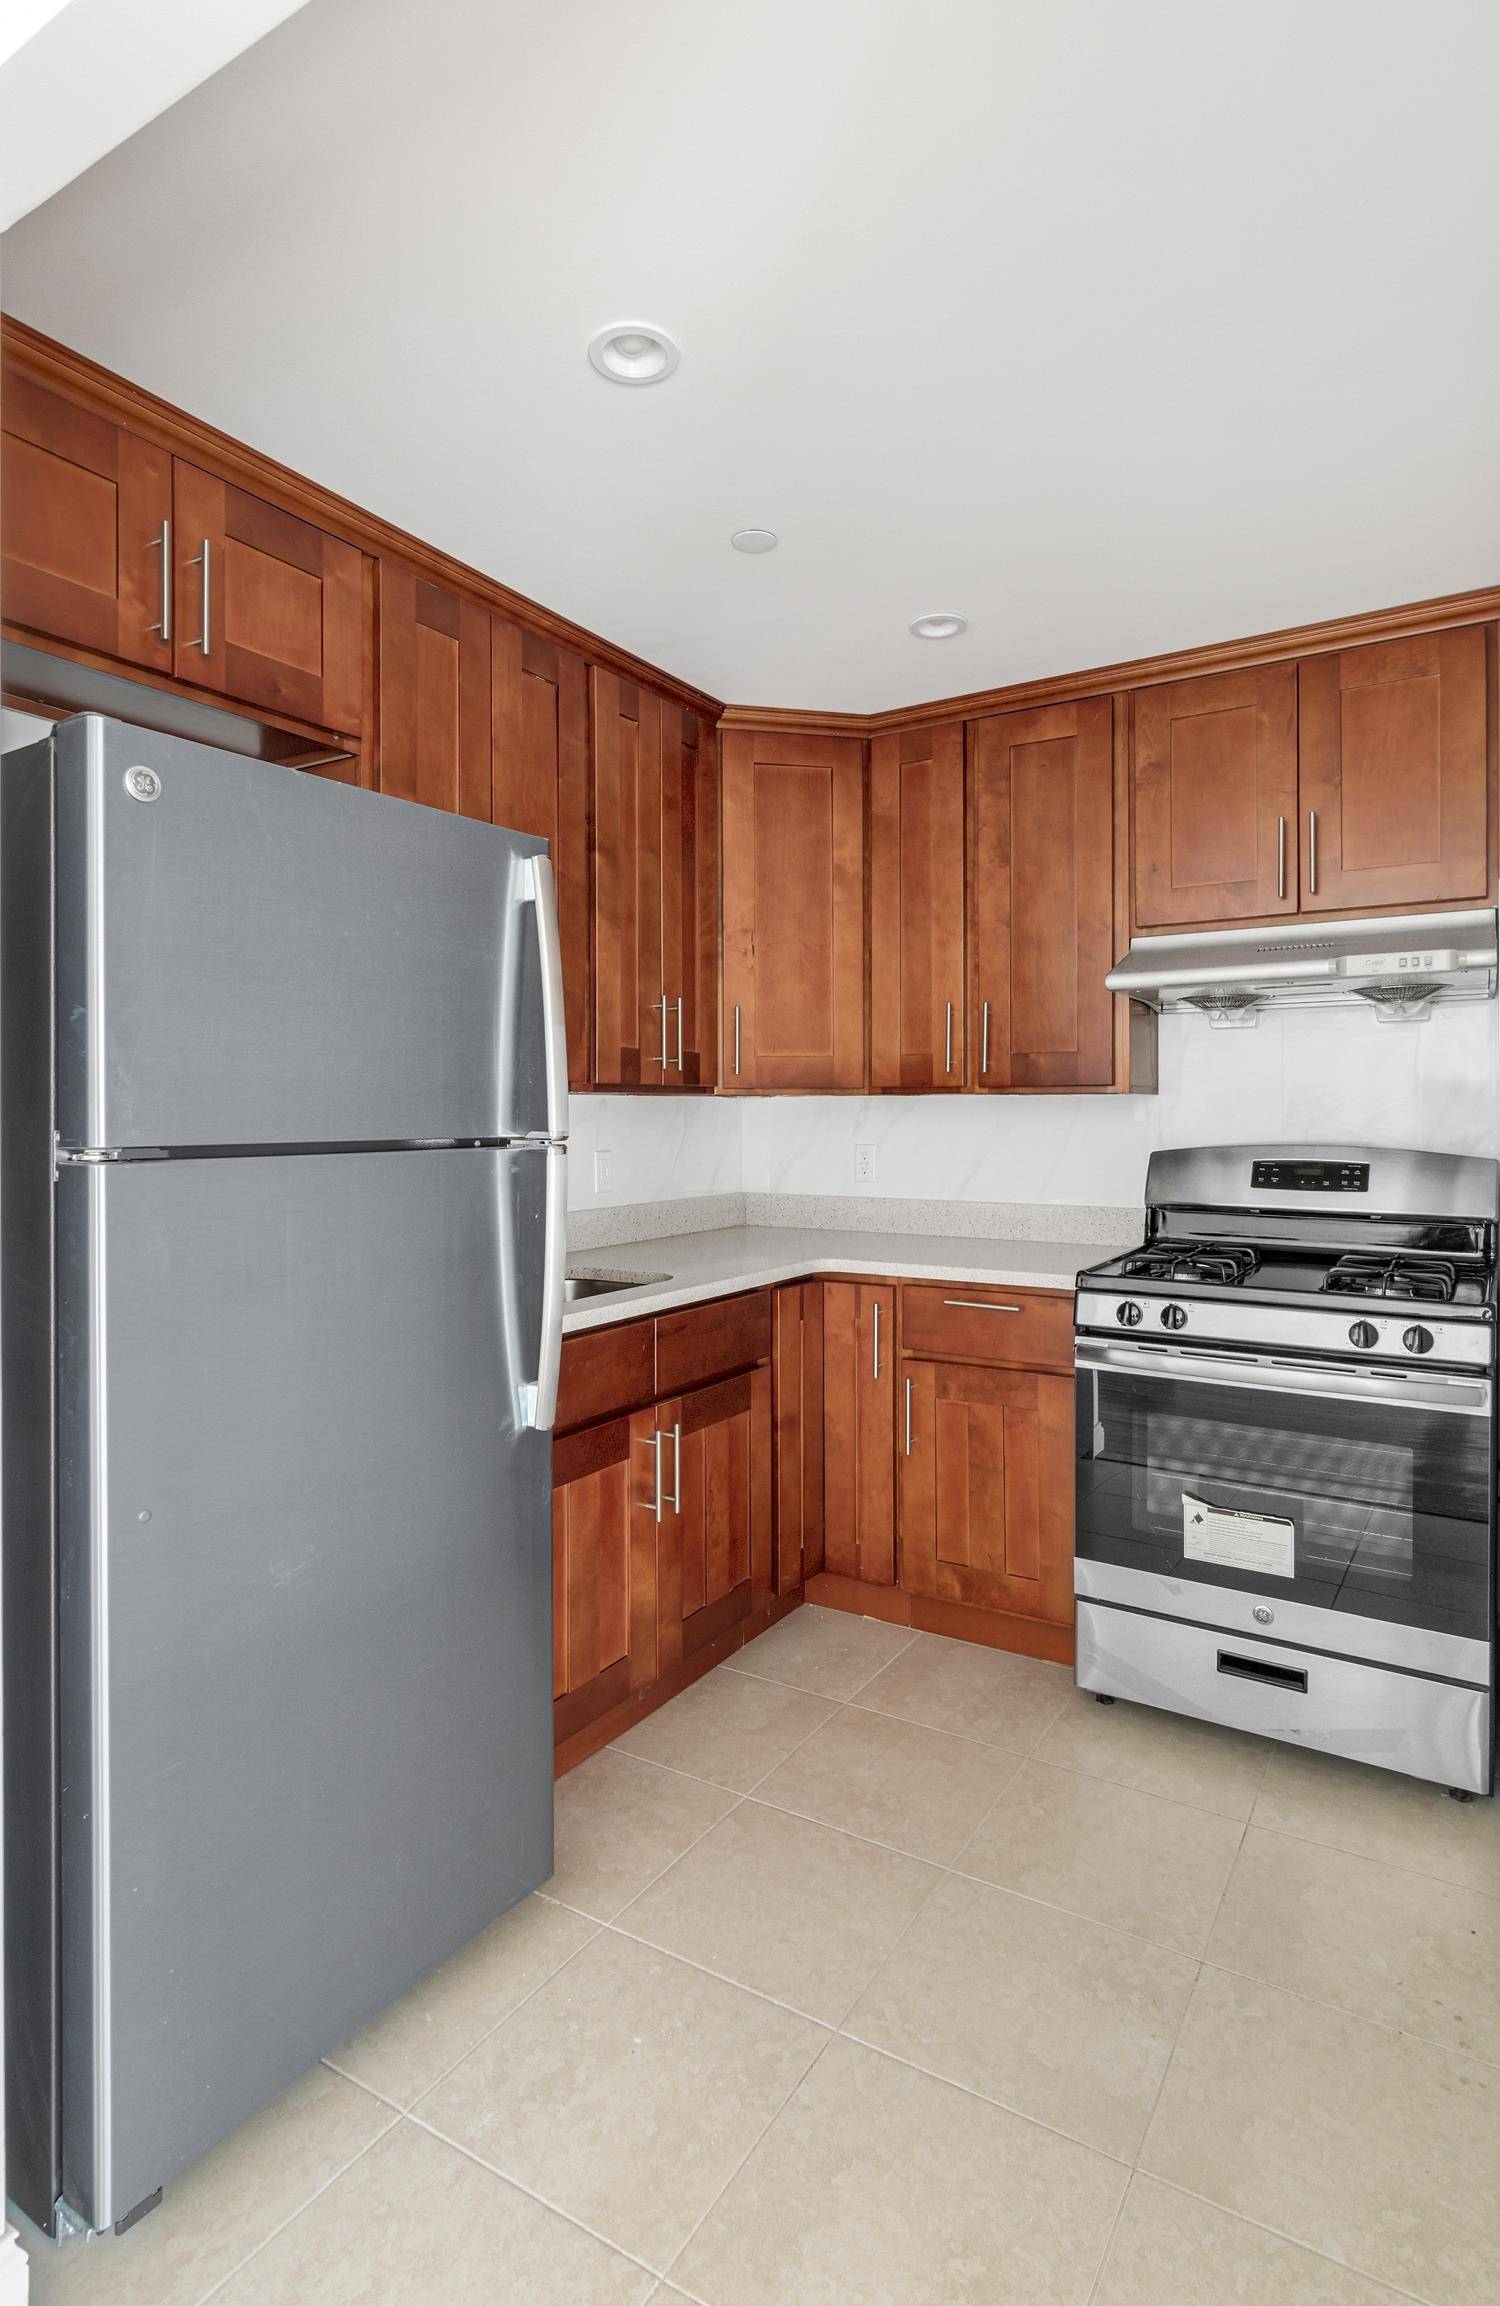 Situated on a higher floor, this 2 bed 2 bath home has a private outdoor space with Manhattan views.